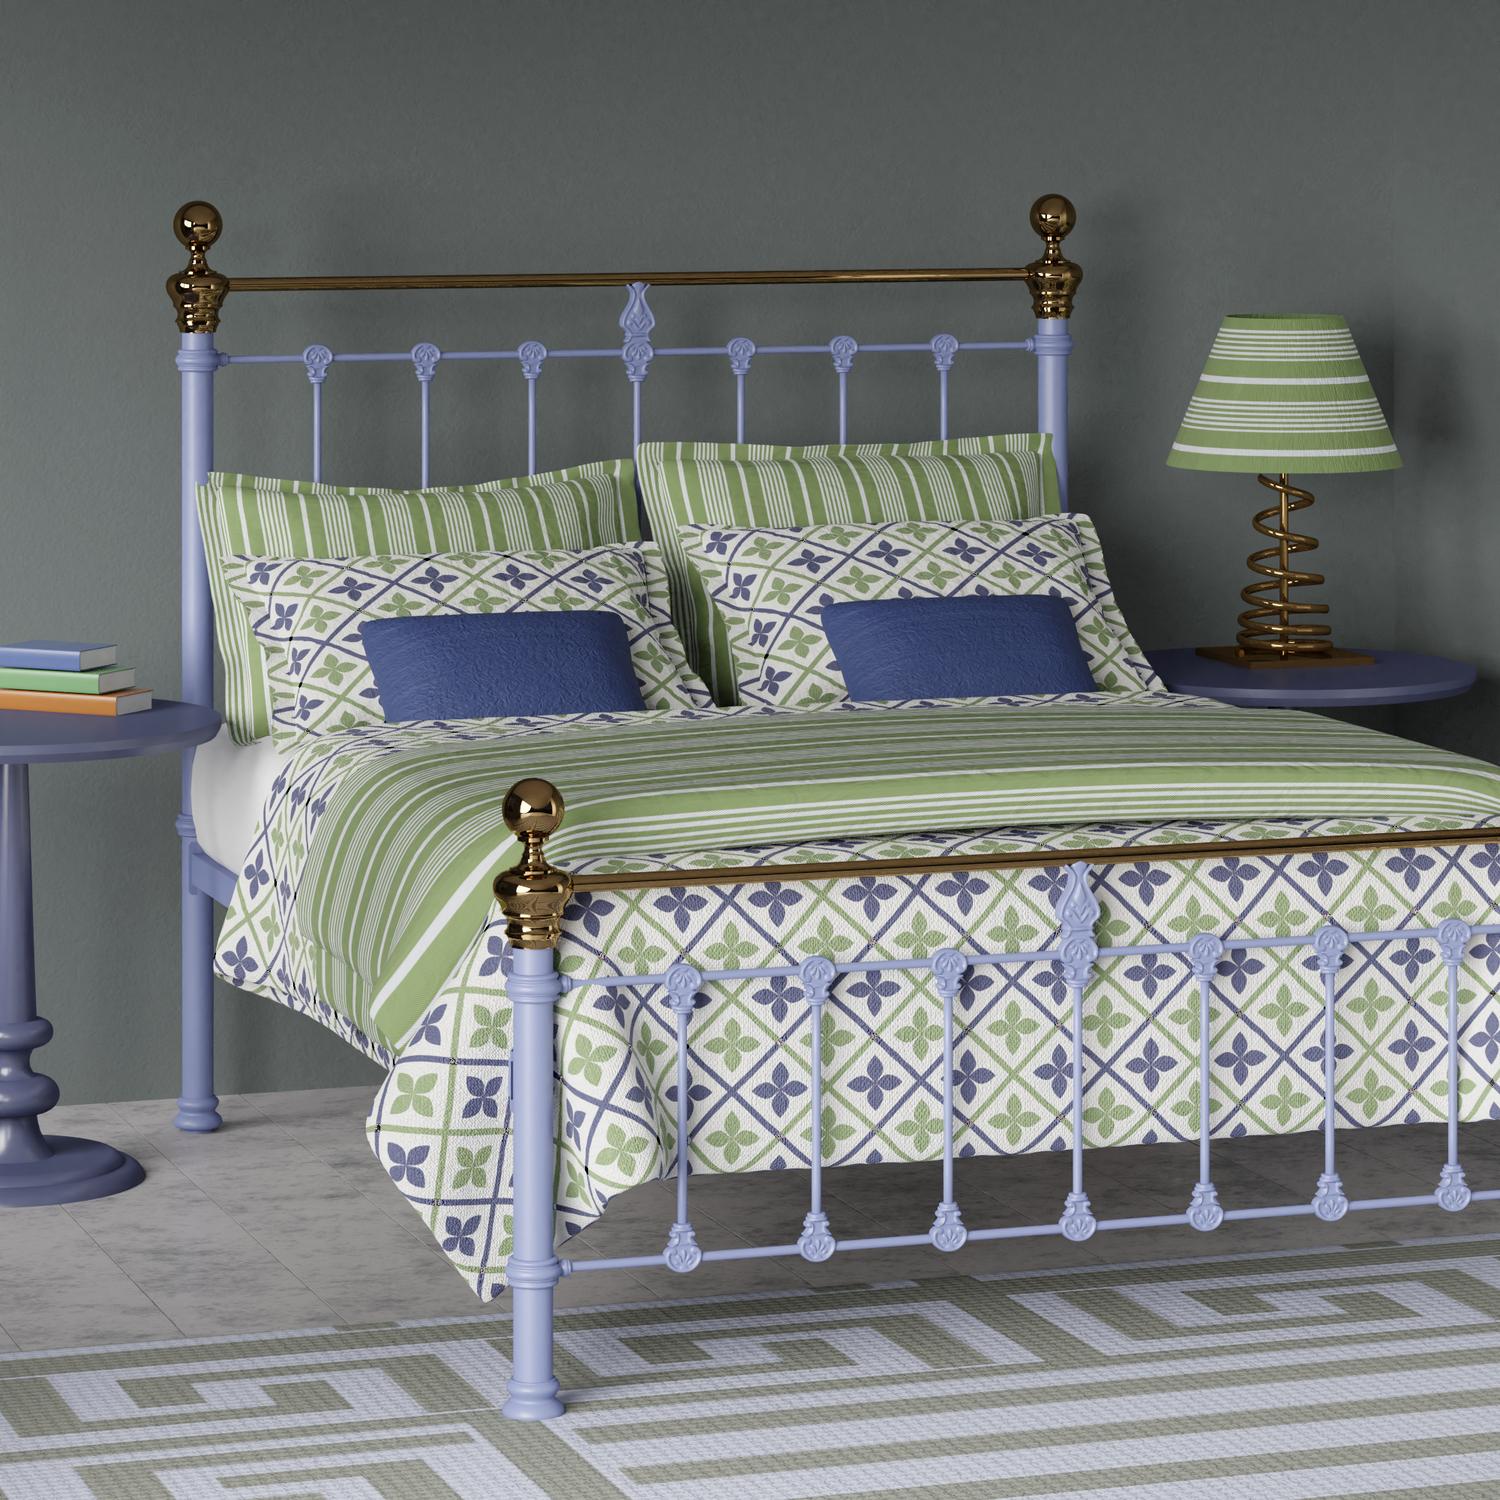 Hamilton low footend iron bed - Image green and purple bedroom